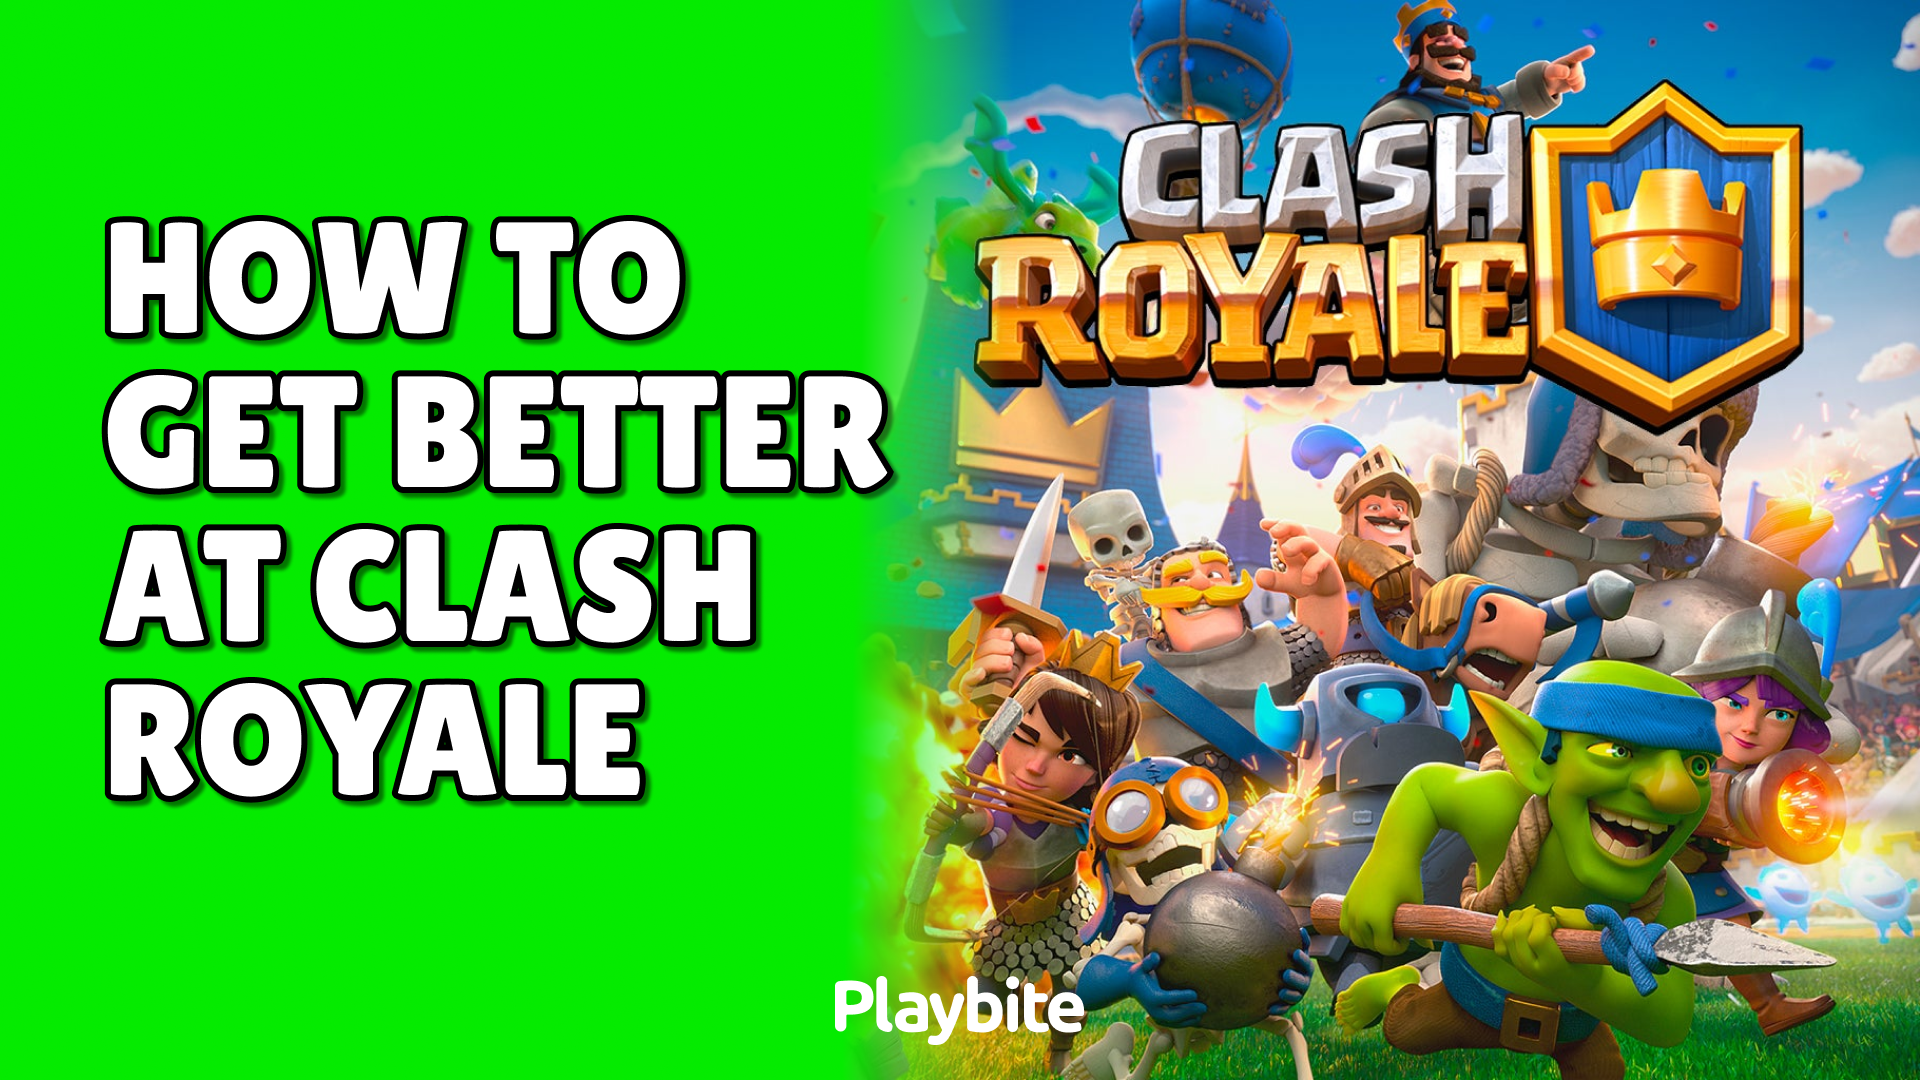 How To Get Better At Clash Royale